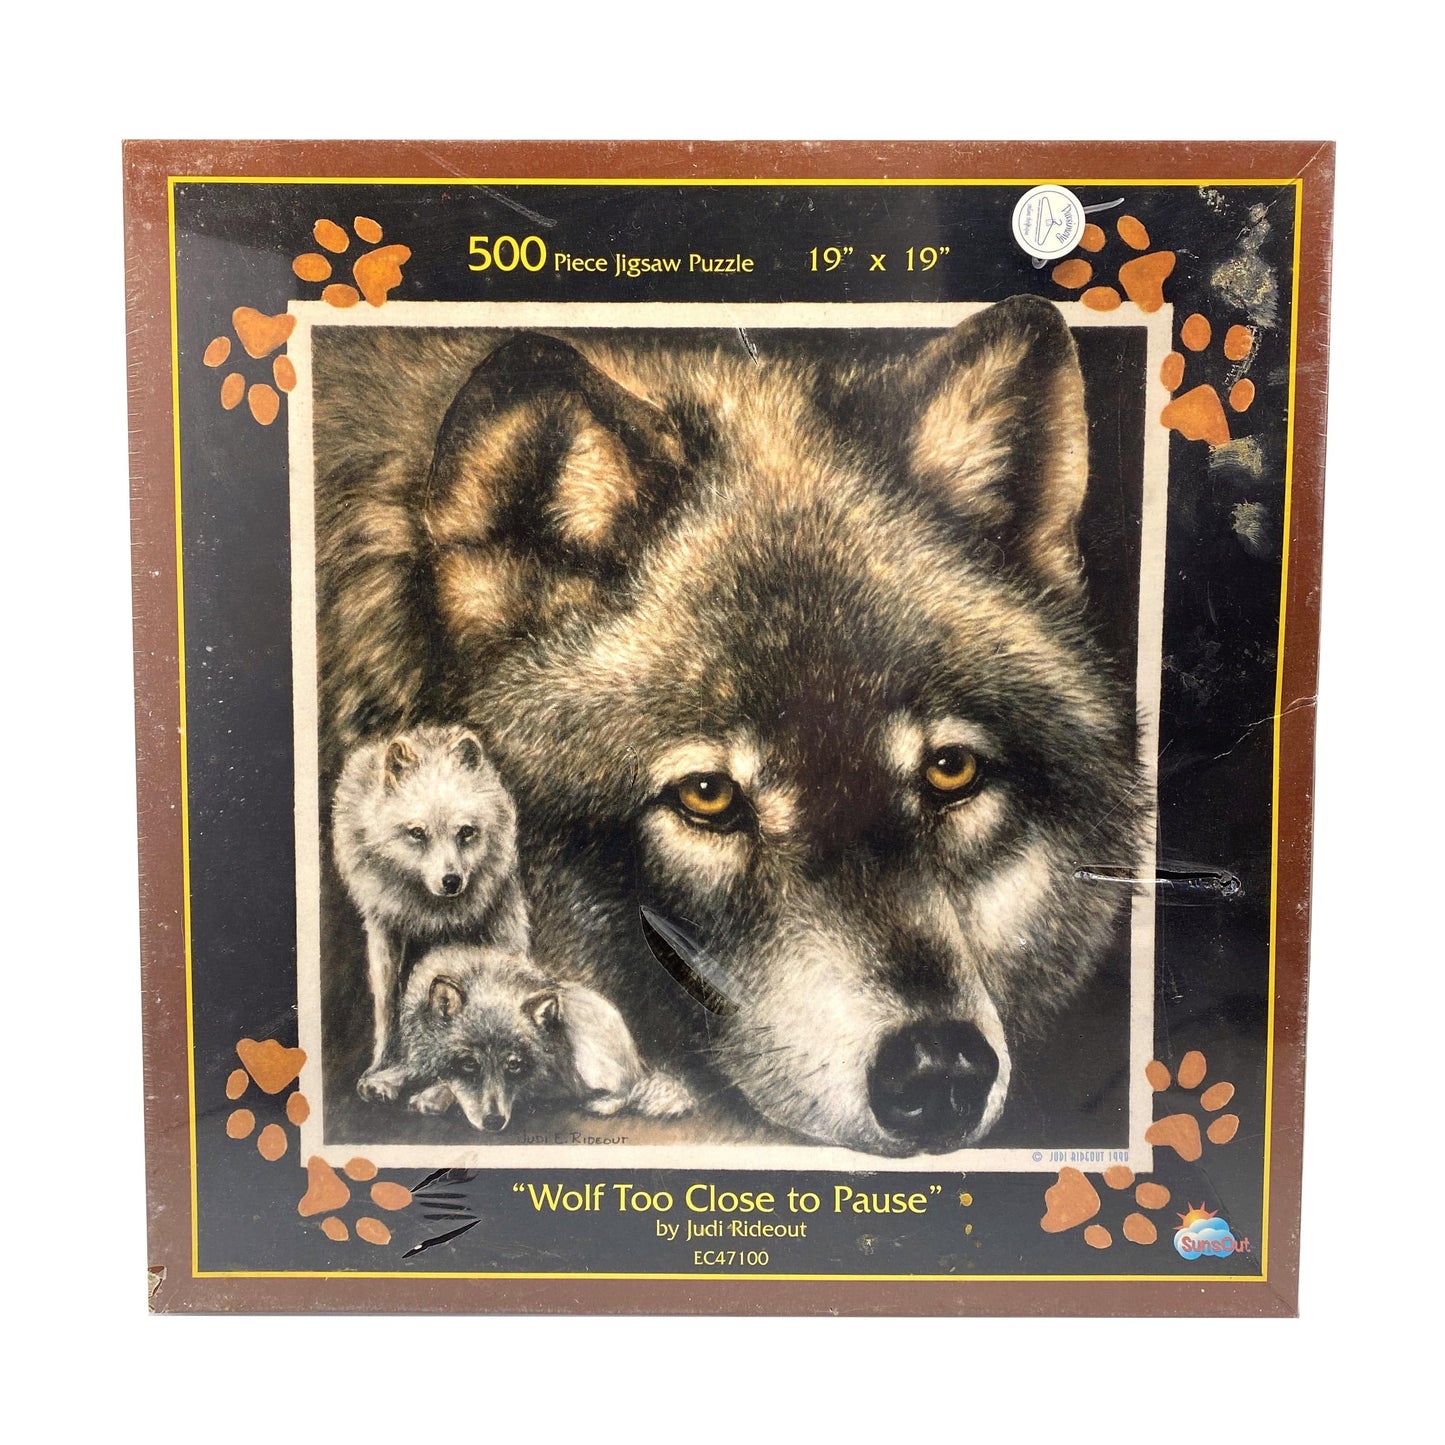 NEW SunsOut “Wolf Too Close To Pause” 500 Piece Jigsaw Puzzle NIB